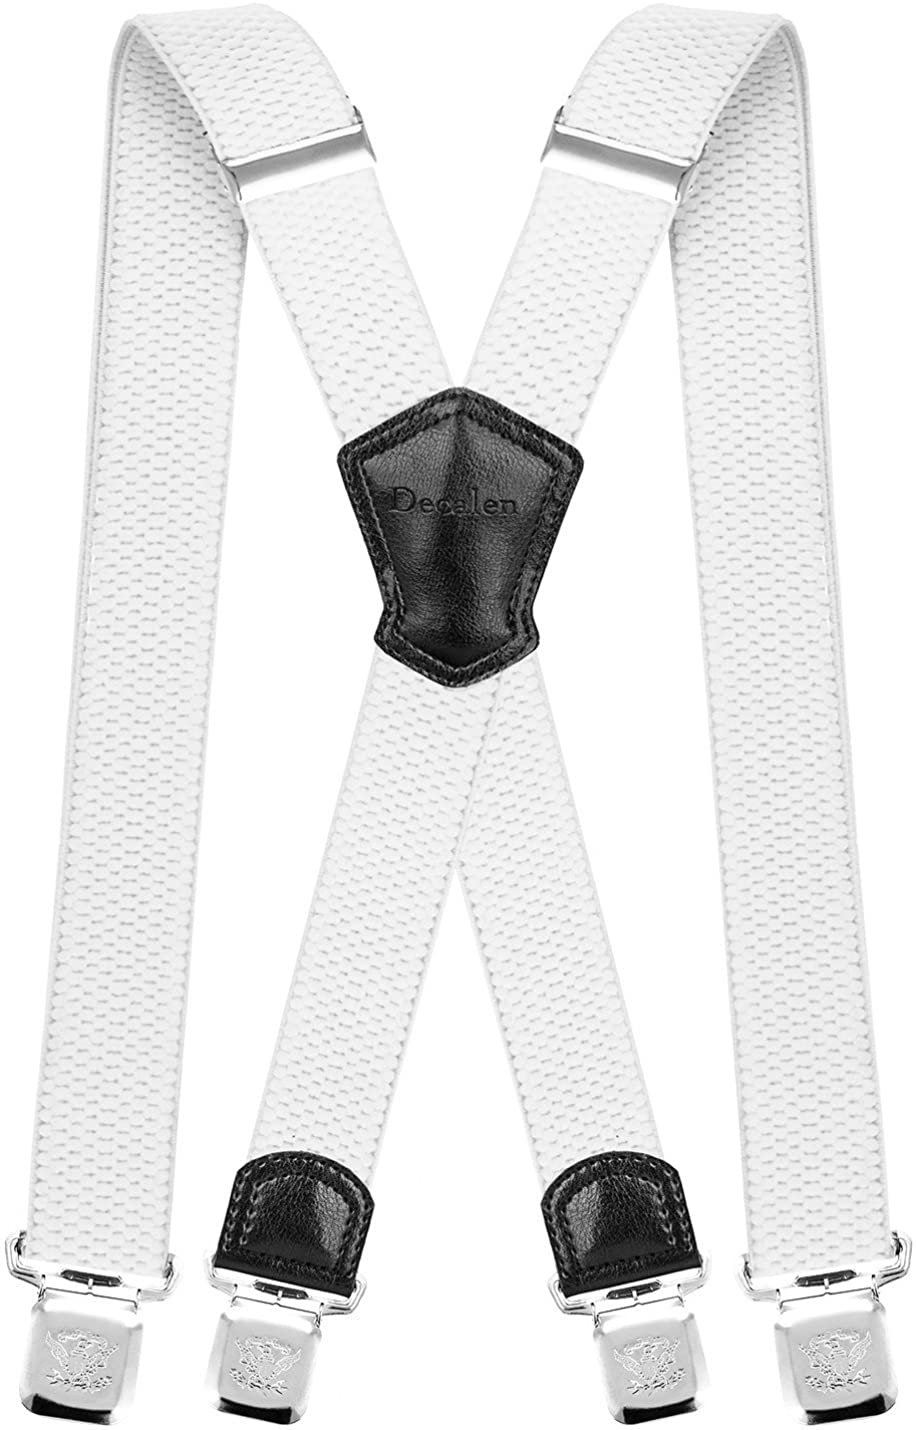 Decalen Mens Suspenders Very Strong Clips Heavy Duty Braces Big and Tall X Style